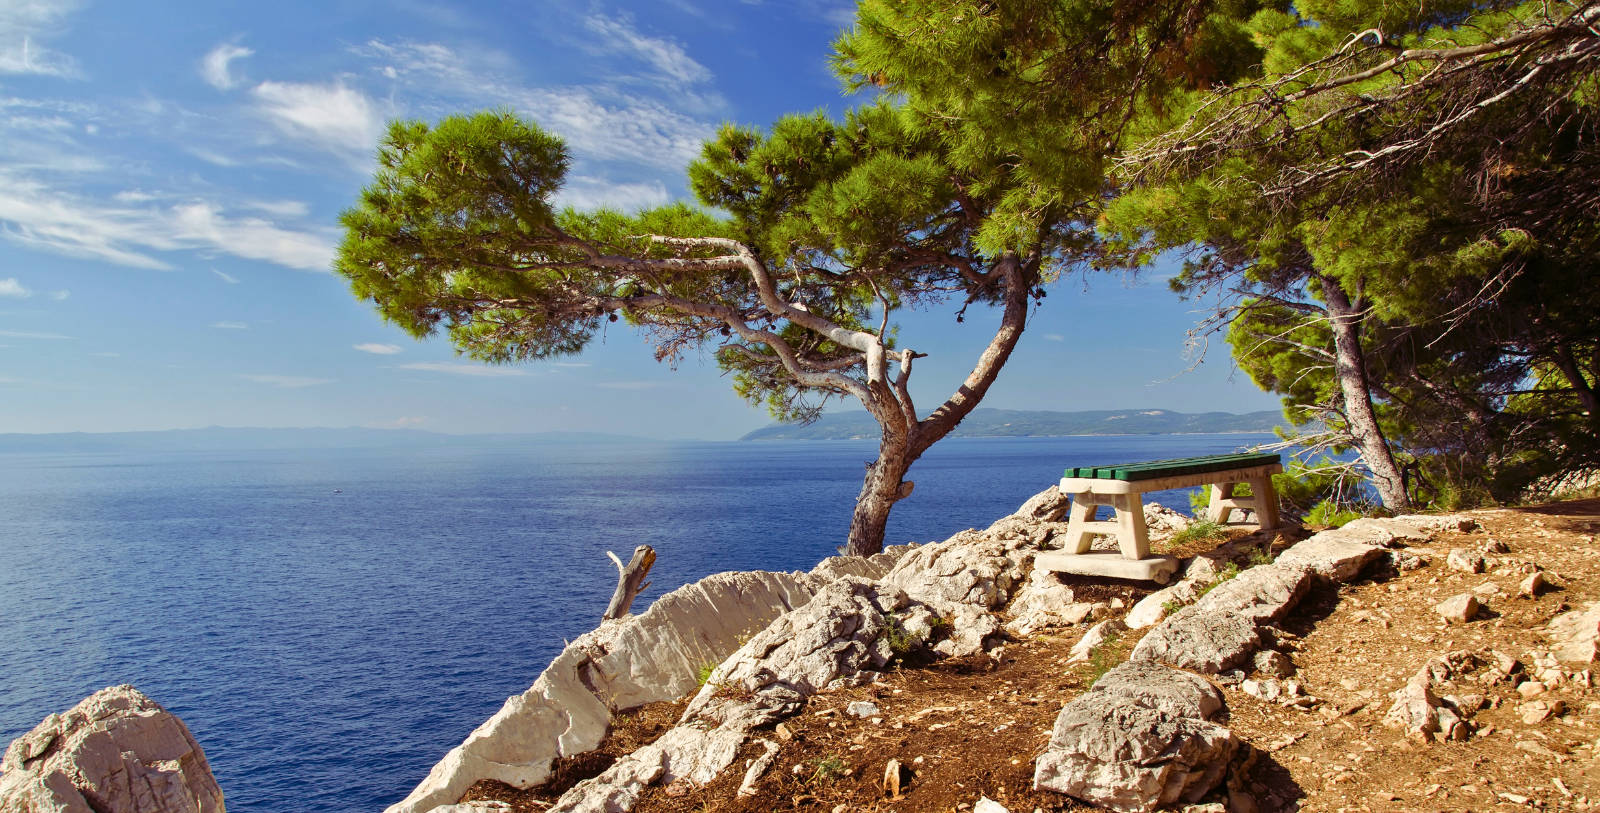 Experience the charismatic coastline of the Adriatic Sea with a leisurely day on one of its sun-drenched beaches or a stroll down the waterfront promenade.